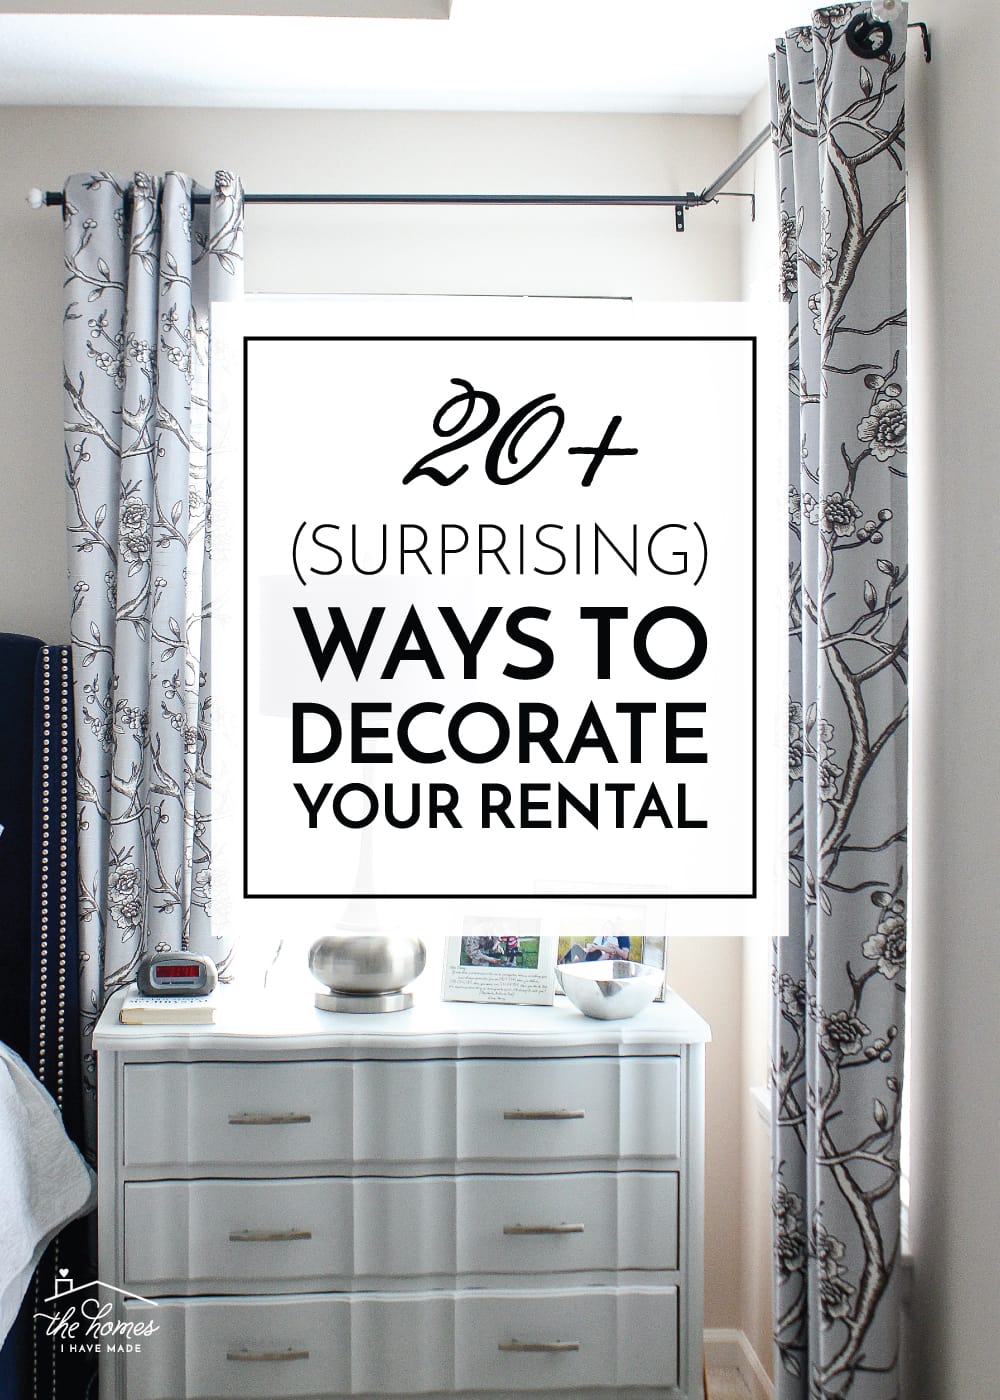 Decorate Your Rental